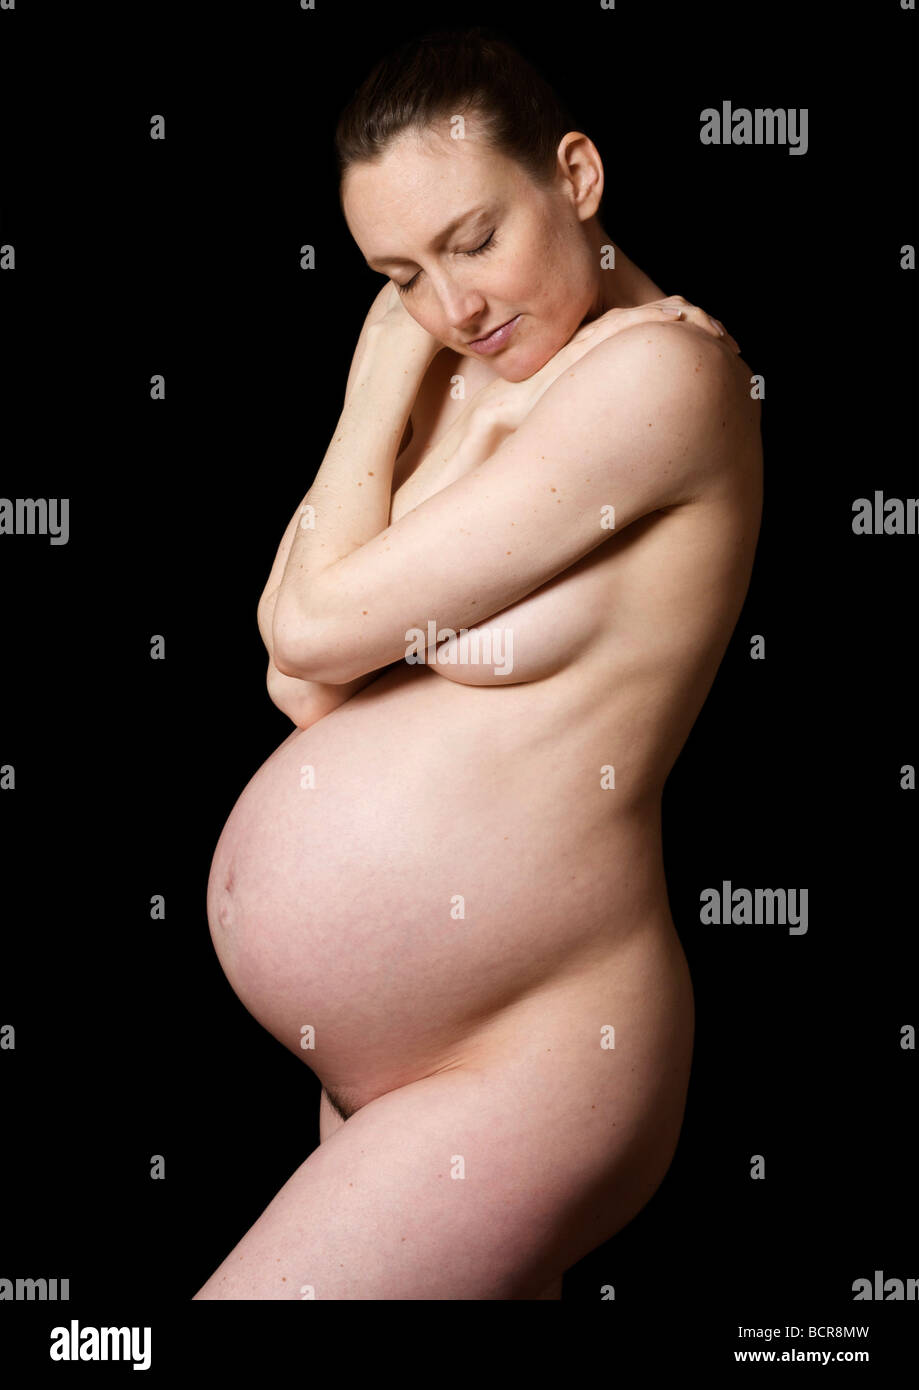 Nude Pregnant Woman At 38 Weeks Stock Photo Alamy